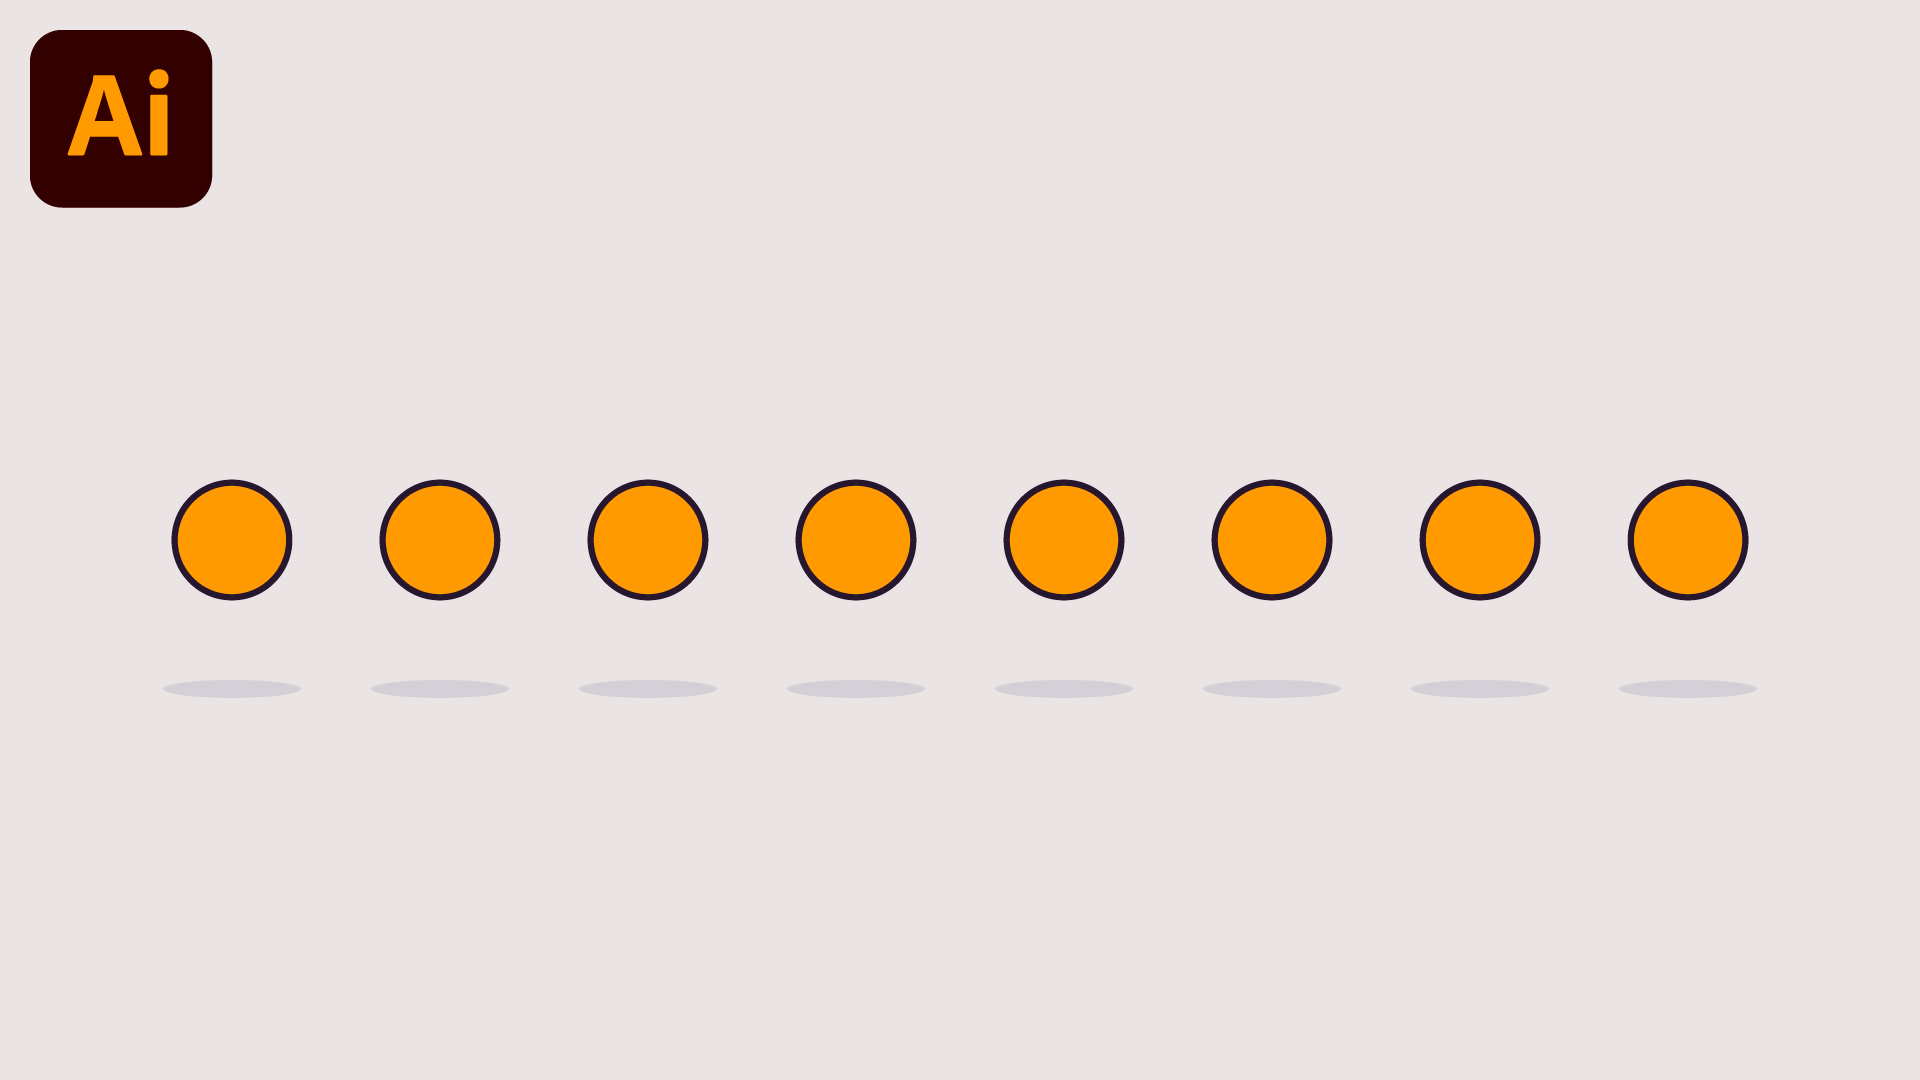 How to Make a Dotted Line in Illustrator